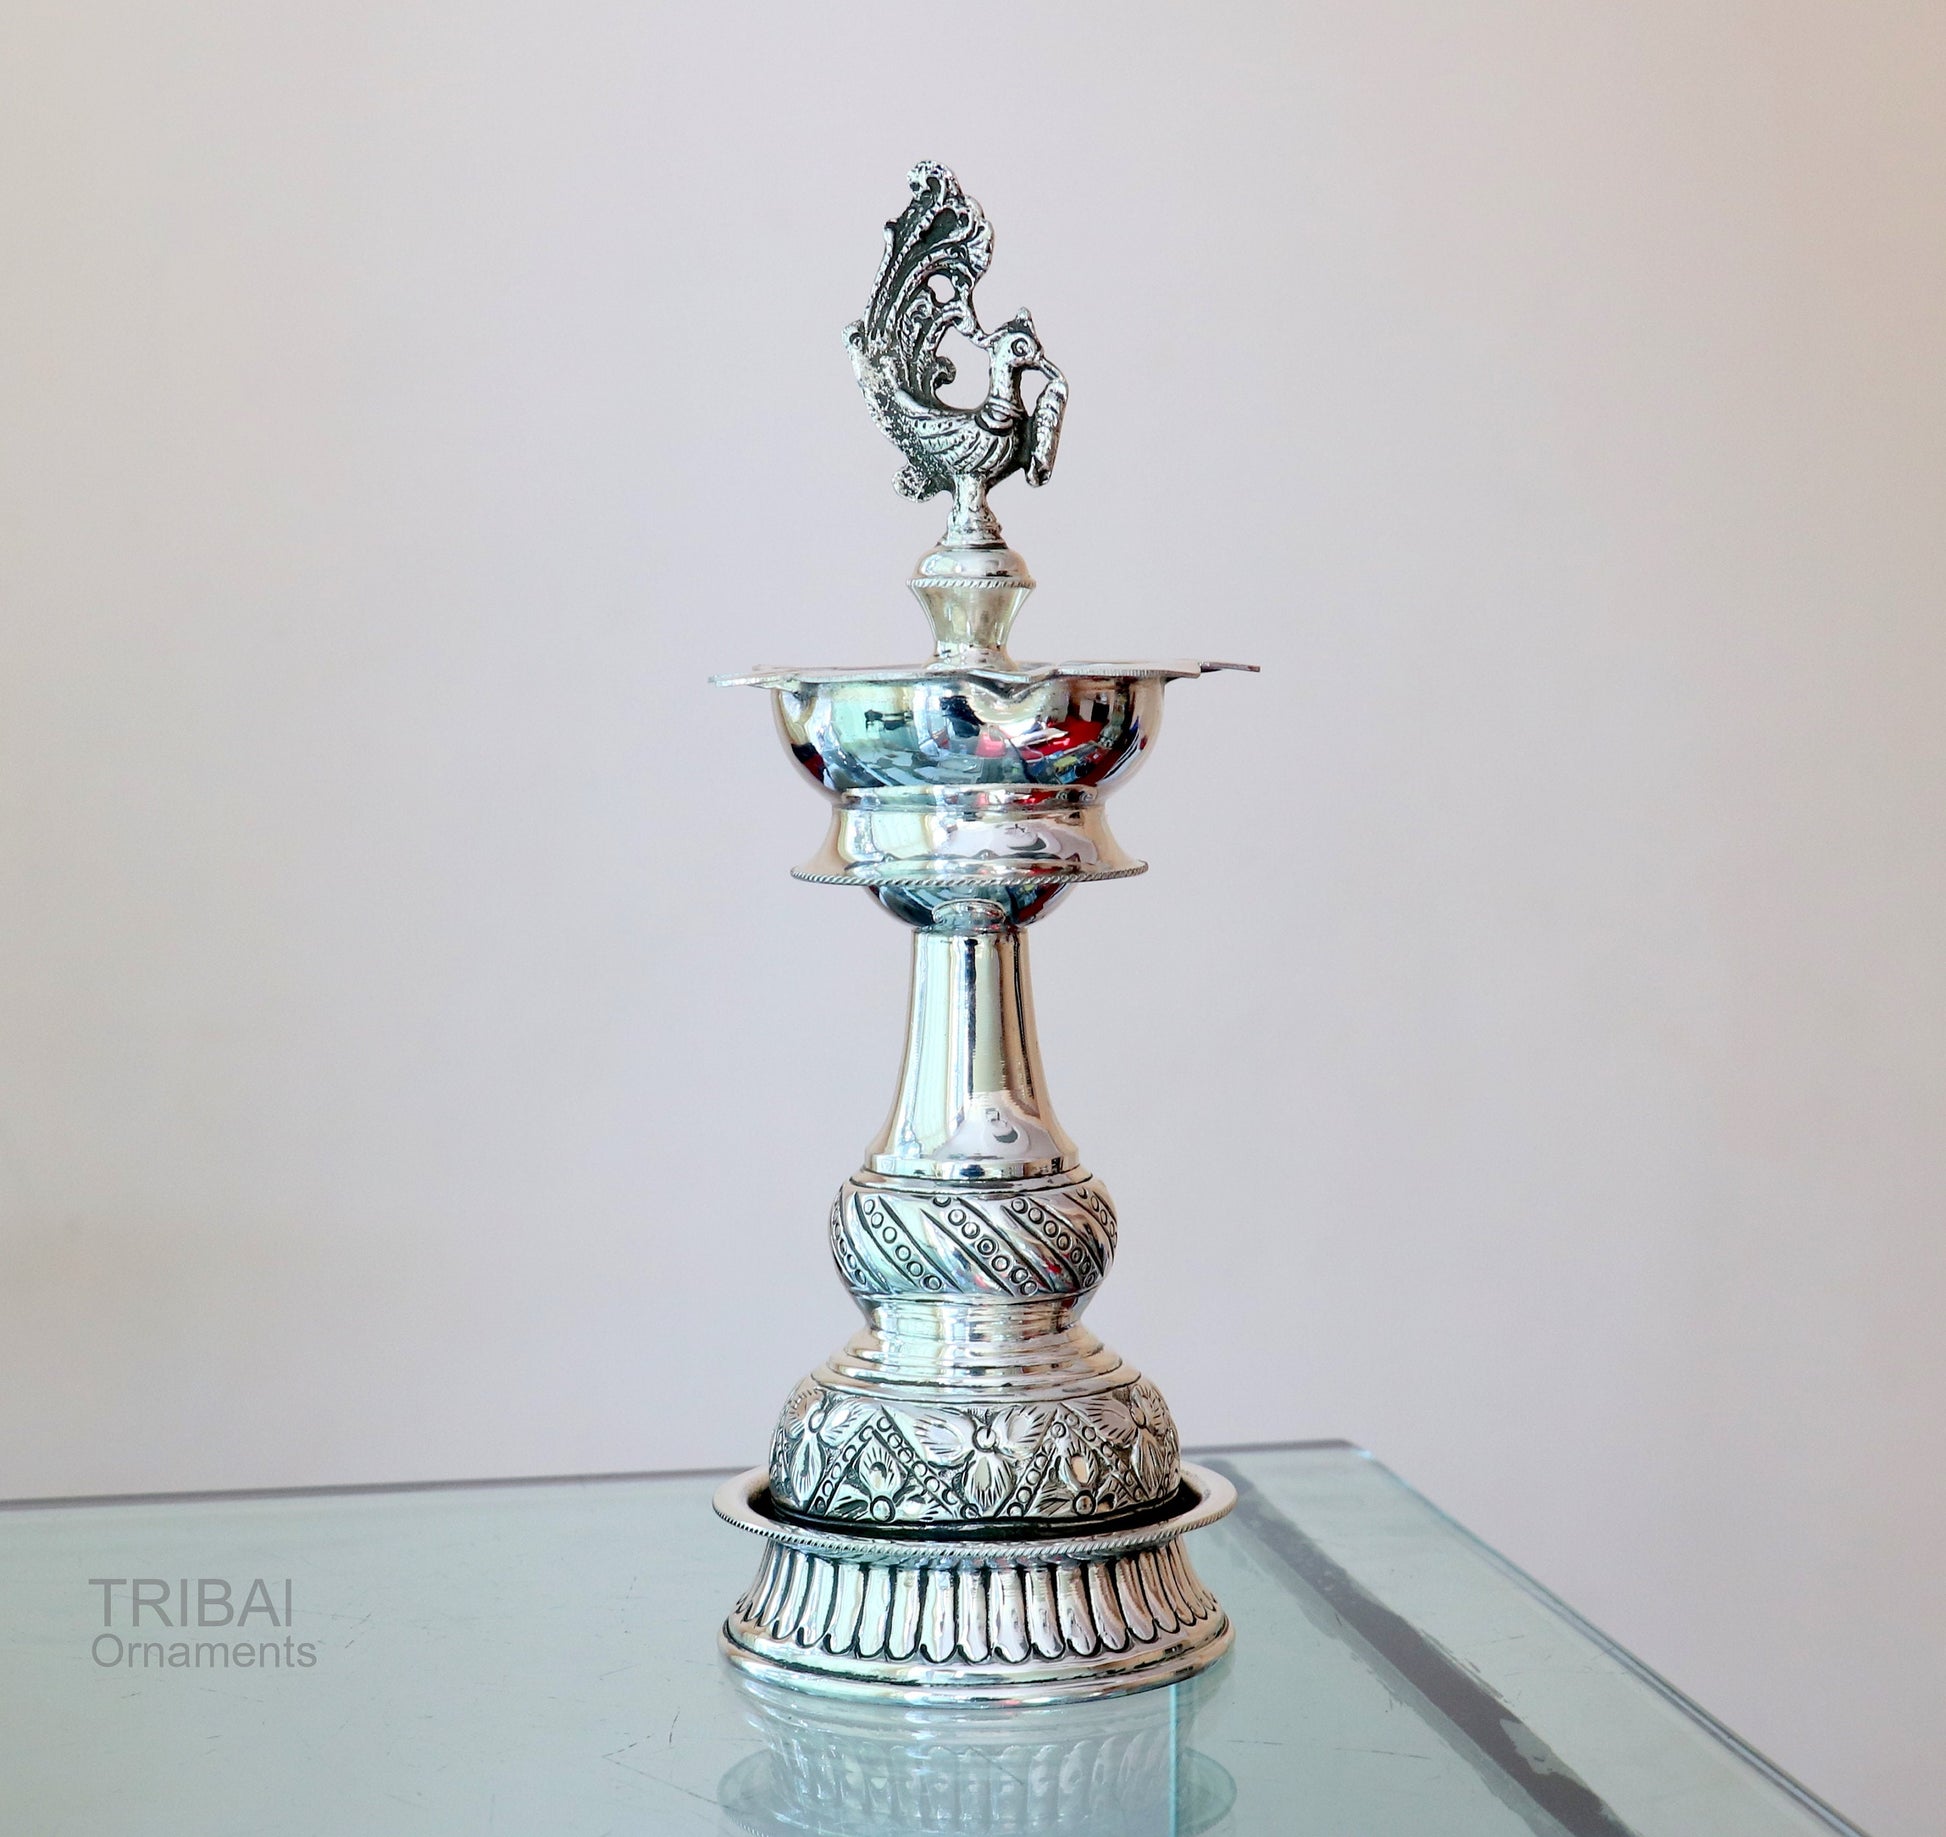 925 sterling silver handcrafted vintage antique design oil lamp, silver Deepak, silver puja article, silver art candle stand figurine su473 - TRIBAL ORNAMENTS